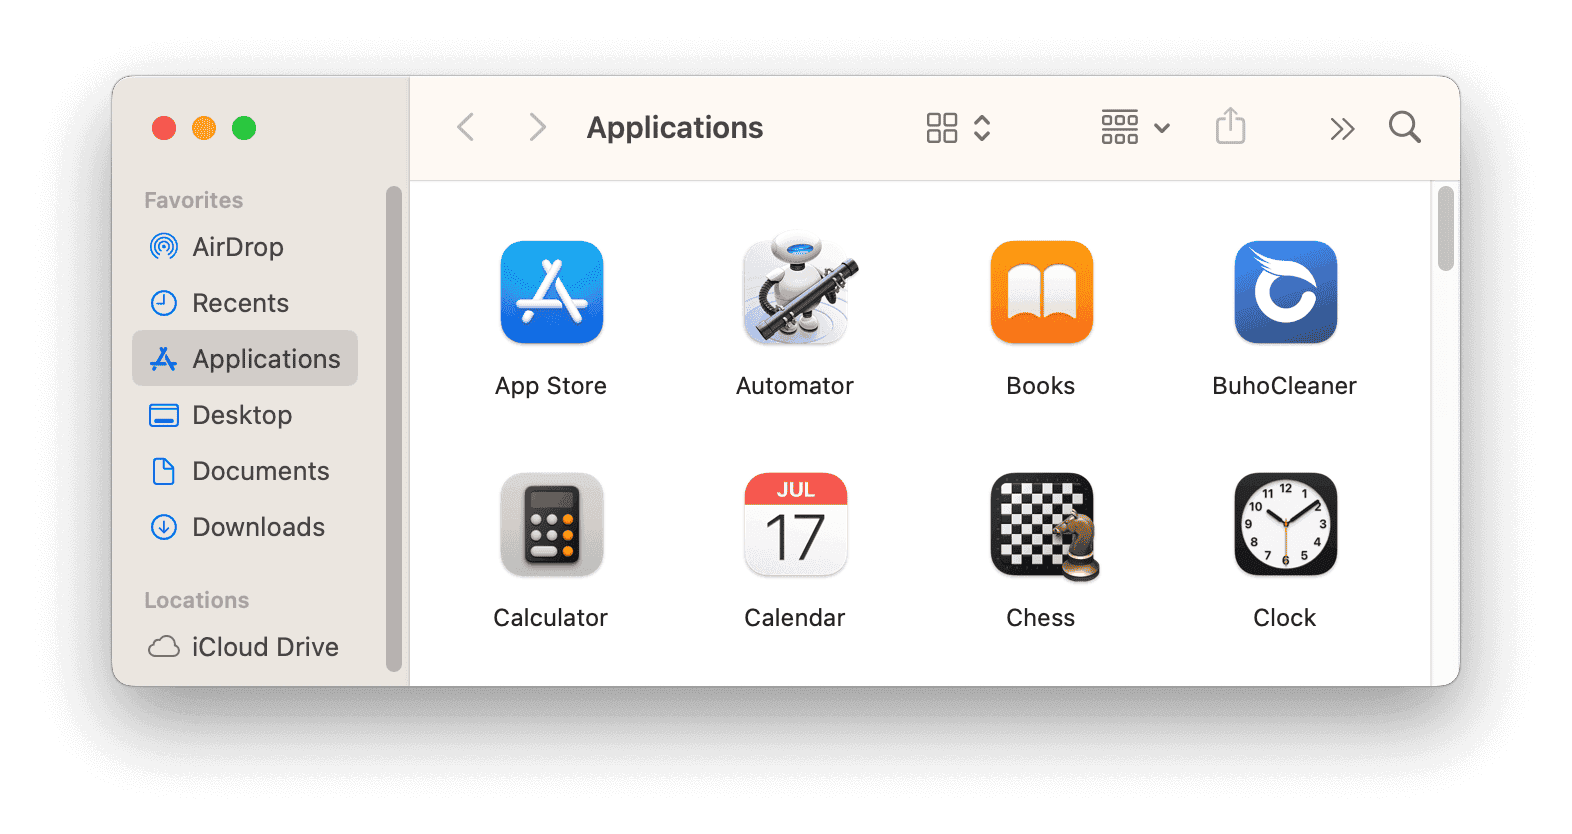 use Finder to open the Applications folder